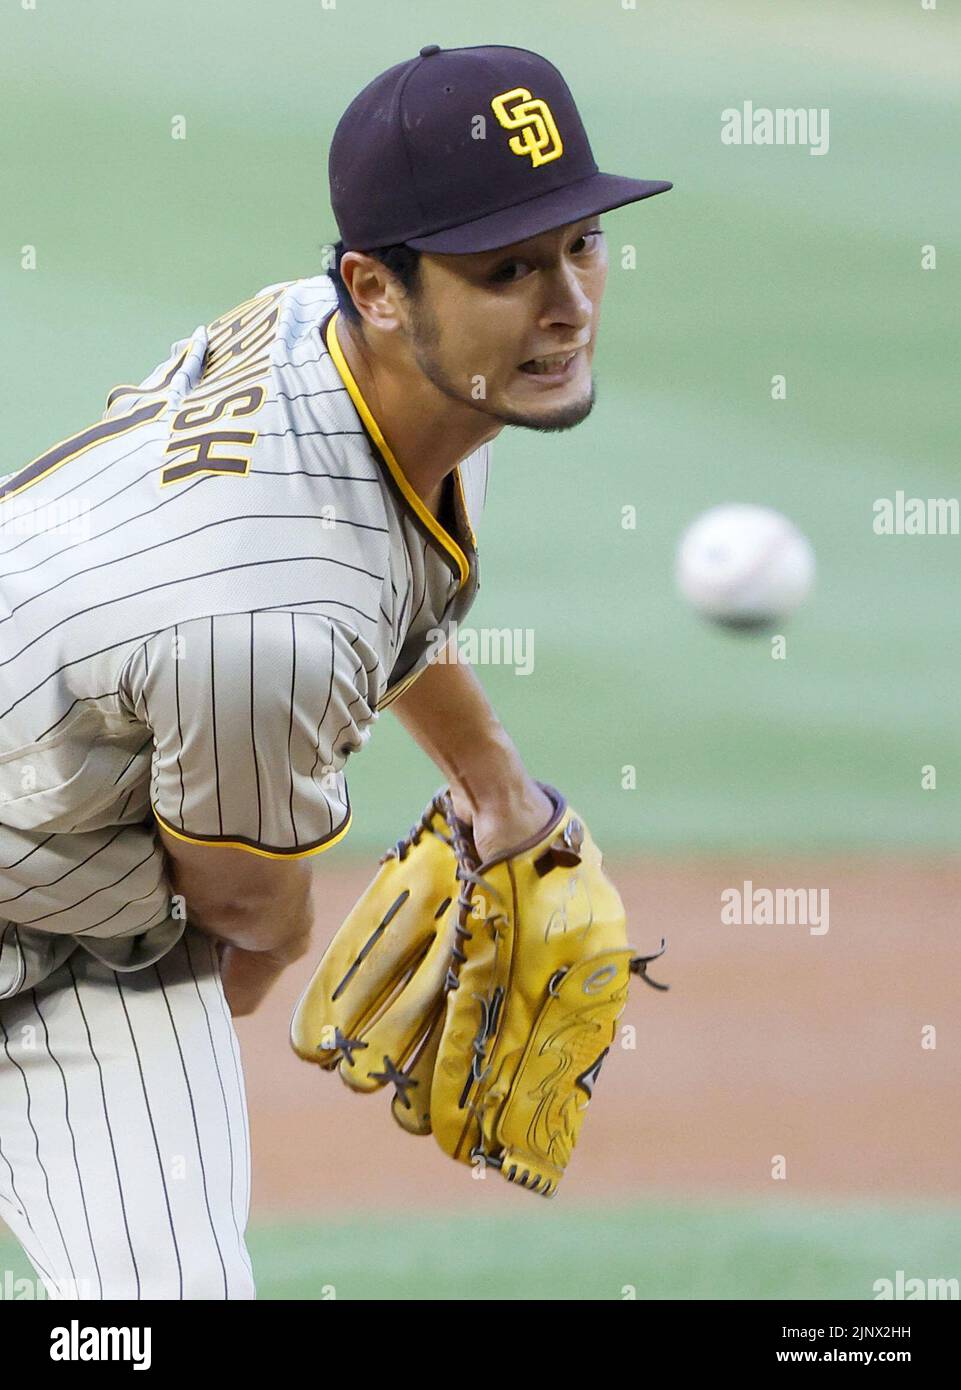 Yu Darvish of the San Diego Padres pitches against the Washington Nationals in a baseball game at Nationals Park in Washington on Aug. 13, 2022. (Kyodo)==Kyodo  Photo via Newscom Stock Photo